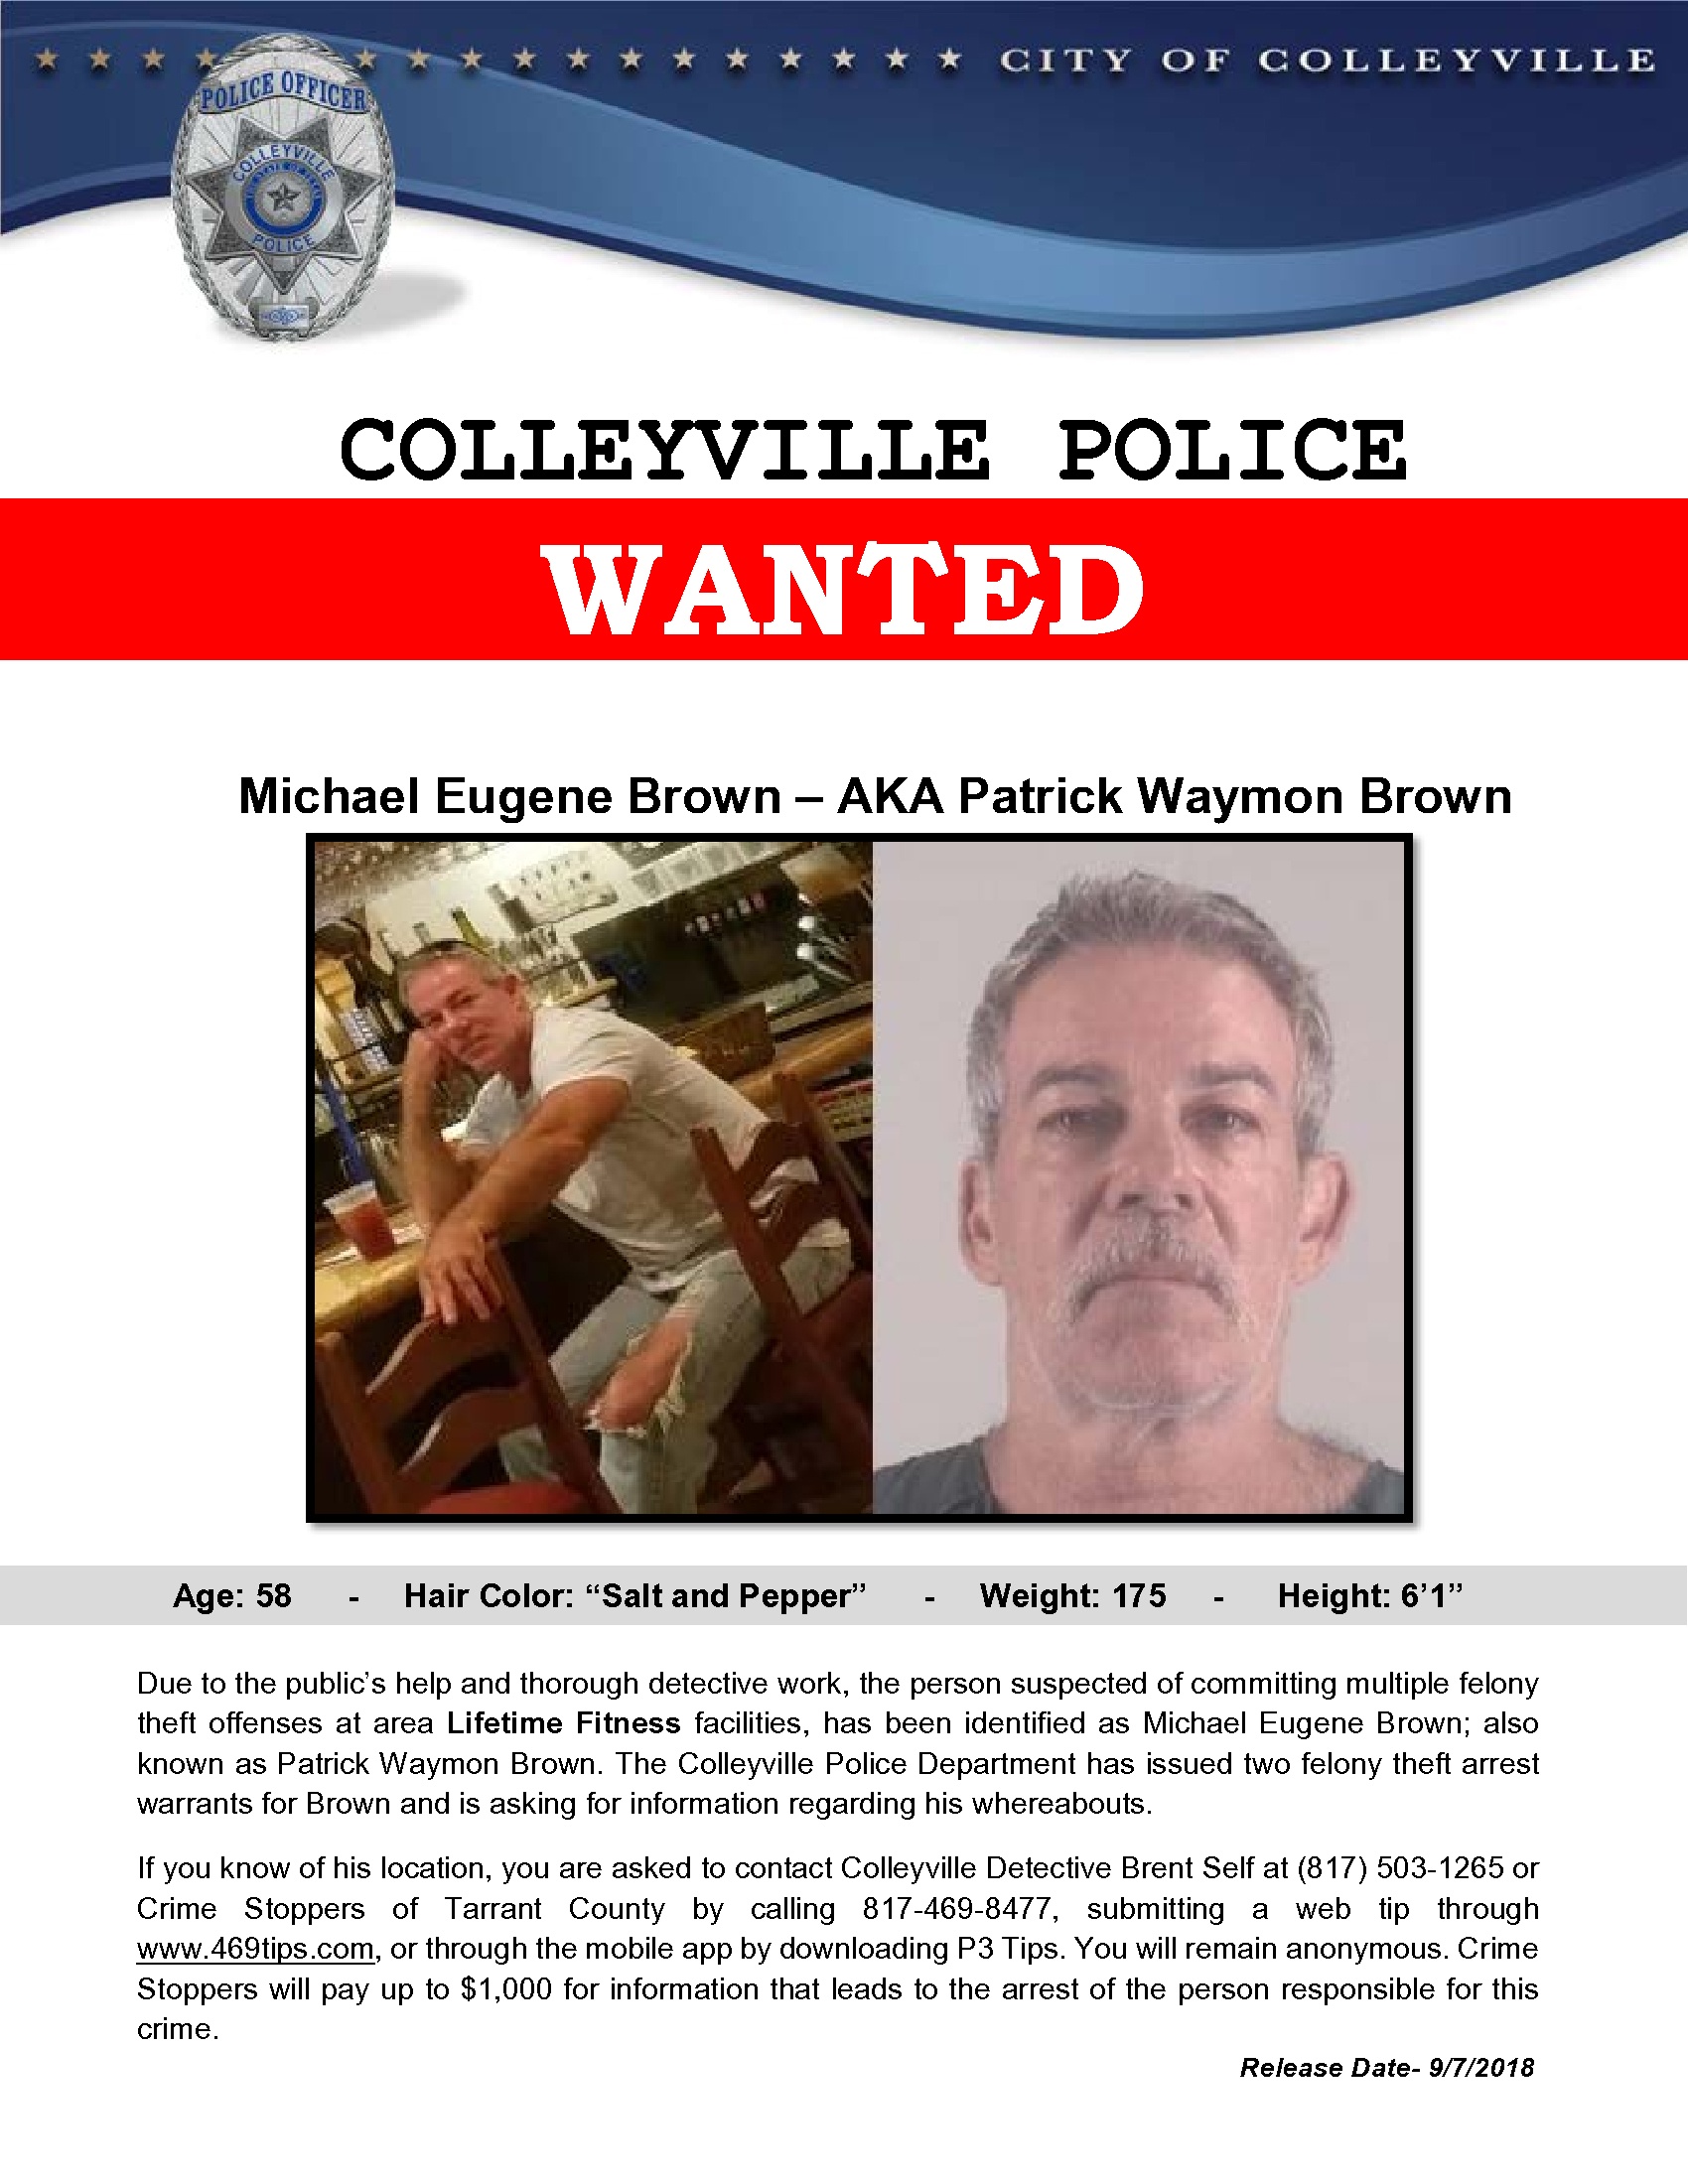 Recent Arrests in Colleyville...Colleyville Police Issue Warrant for Lifetime Fitness Crook